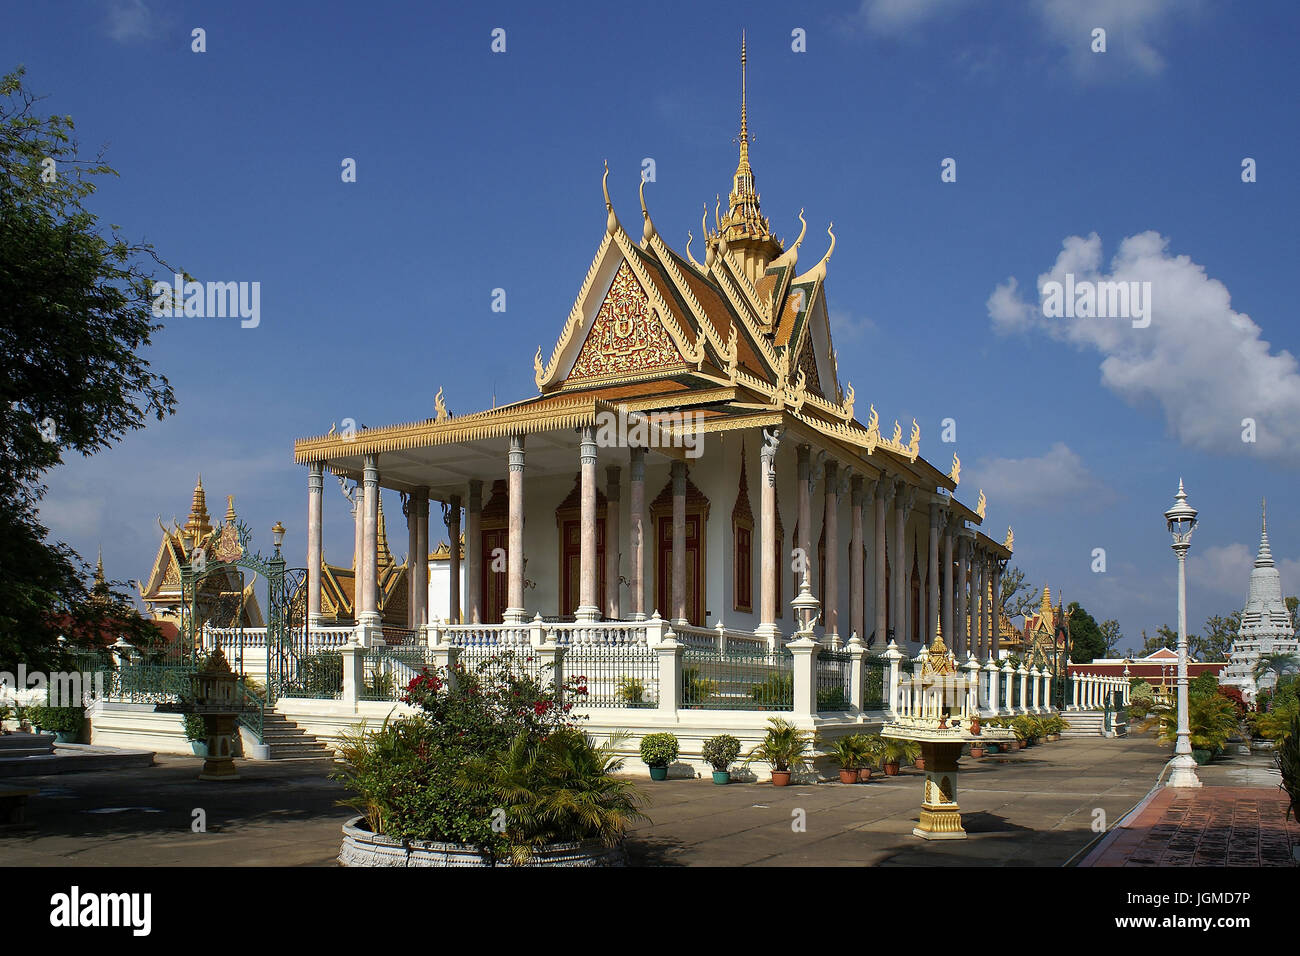 The Silver Pagoda, The silver pagoda in Pnom Penh, Die silberne Pagode in Pnom Penh Stock Photo